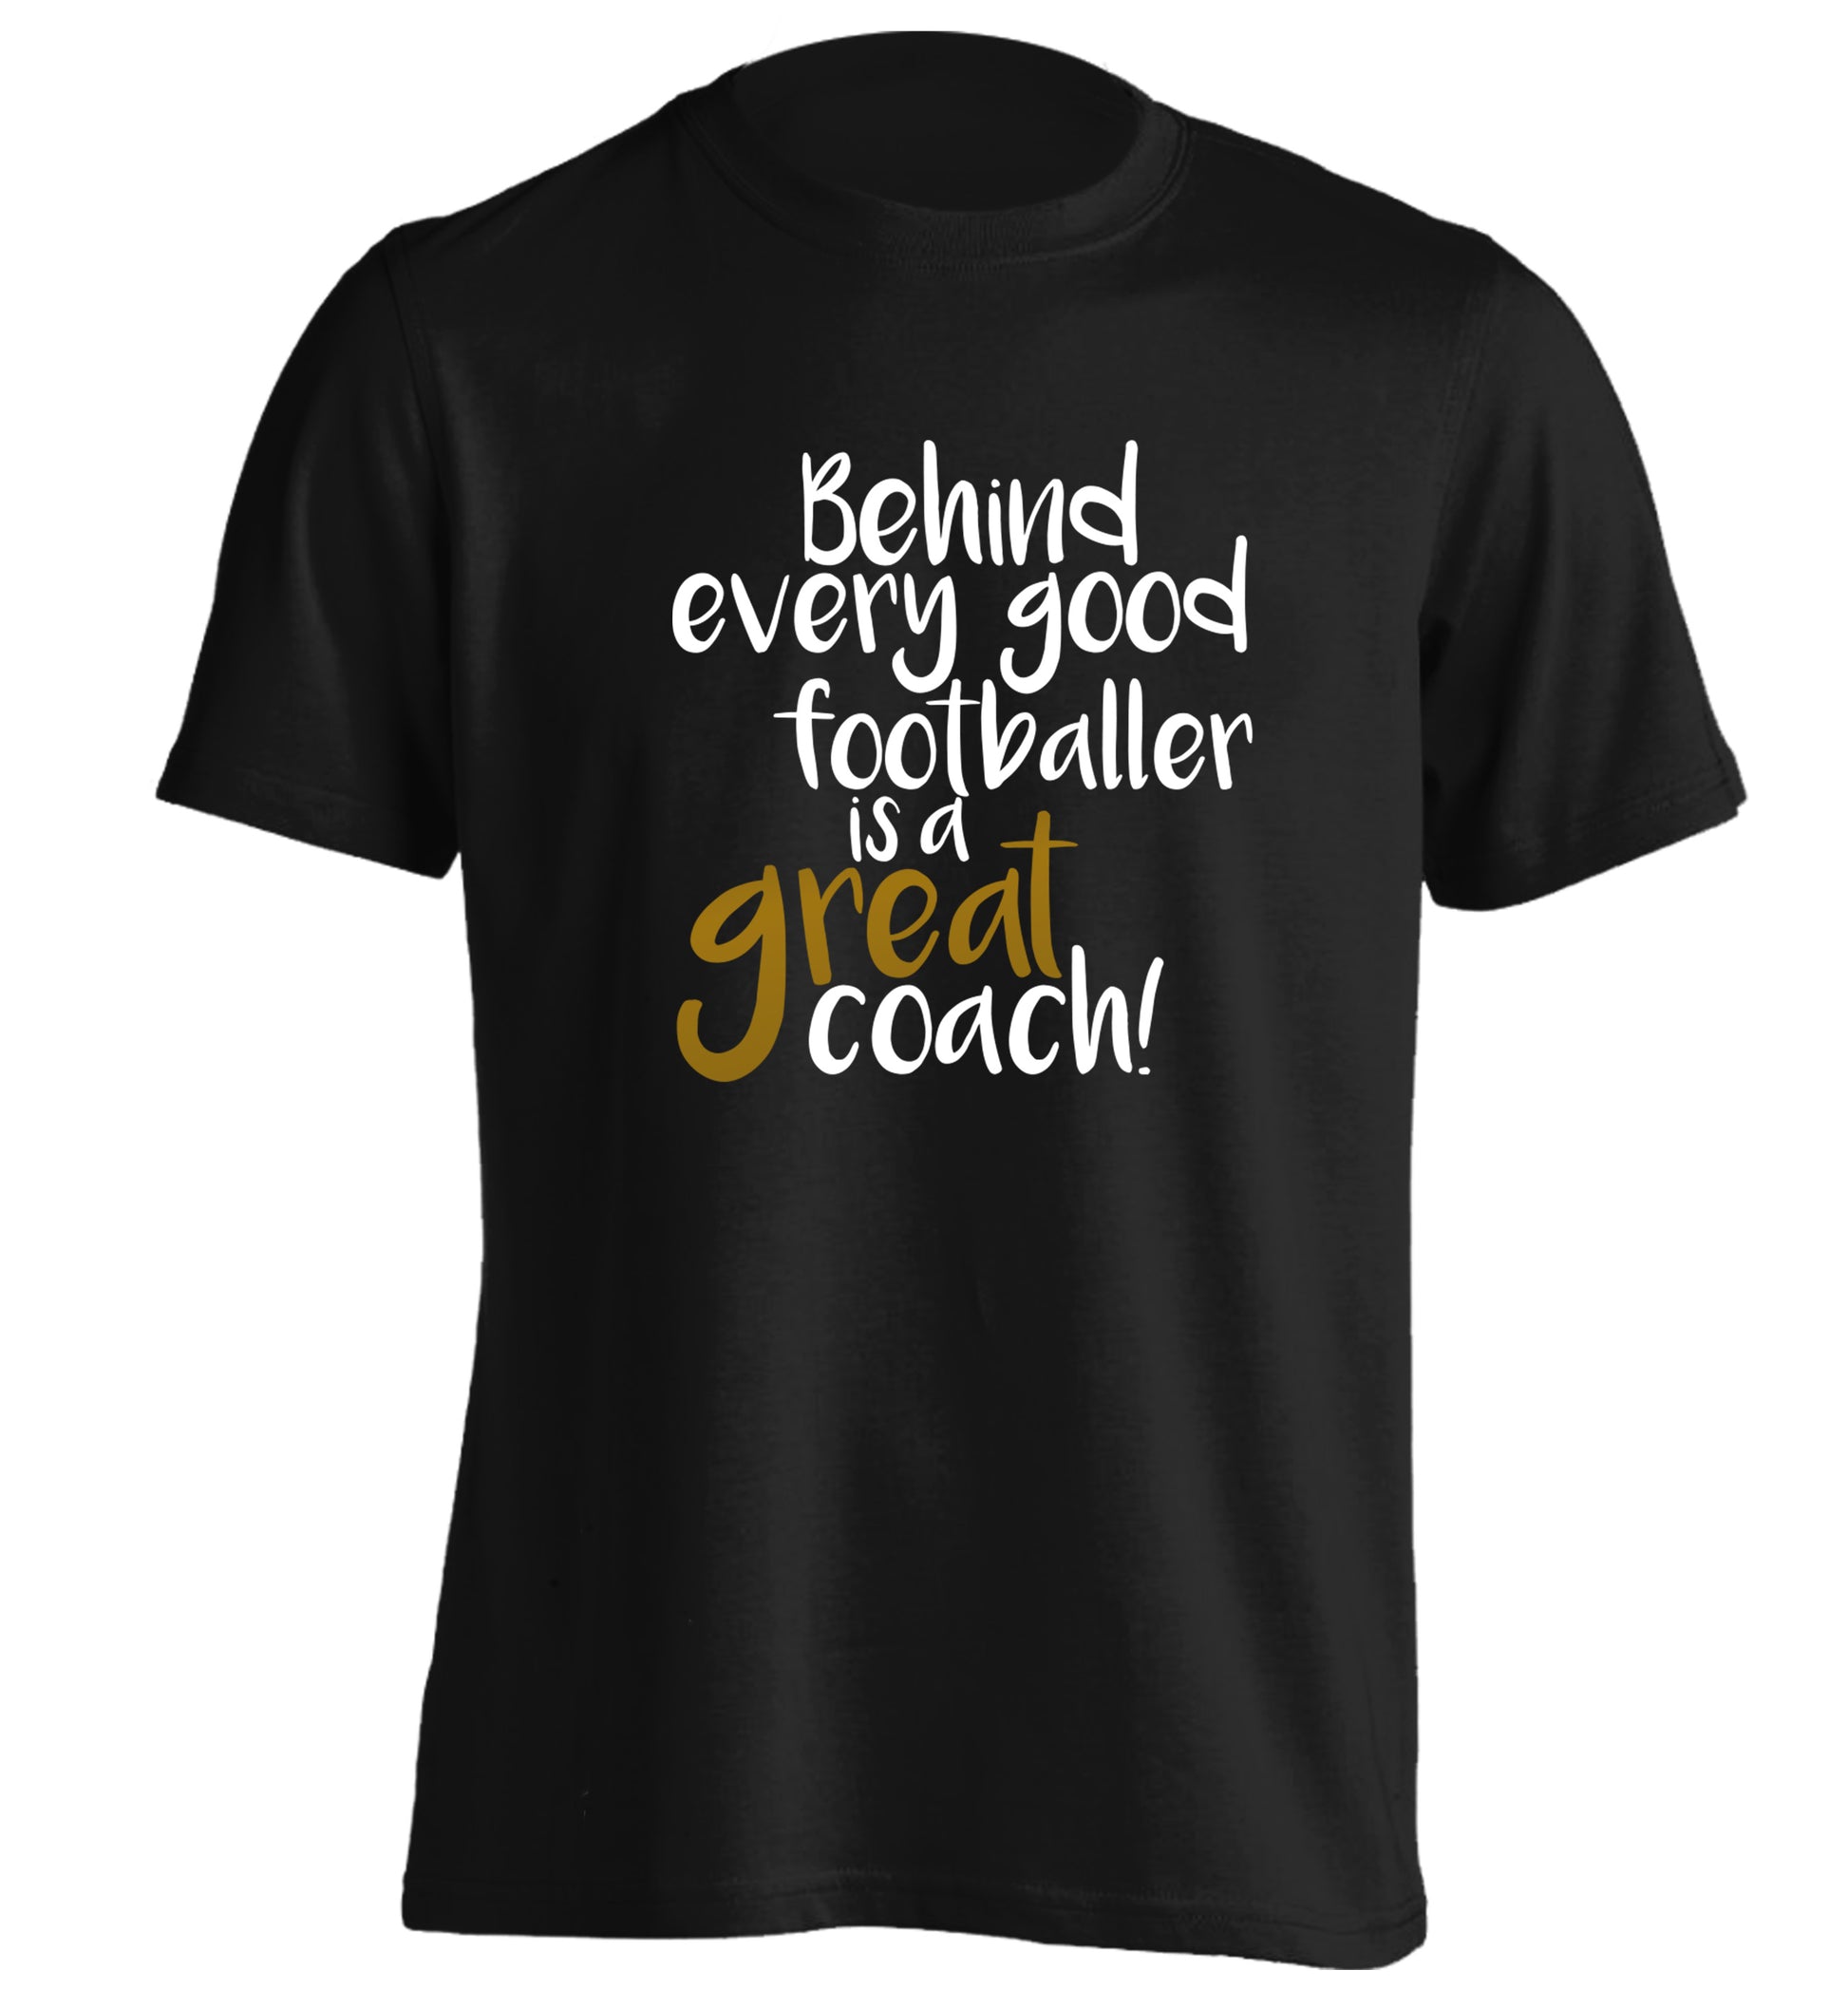 Behind every good footballer is a great coach! adults unisexblack Tshirt 2XL